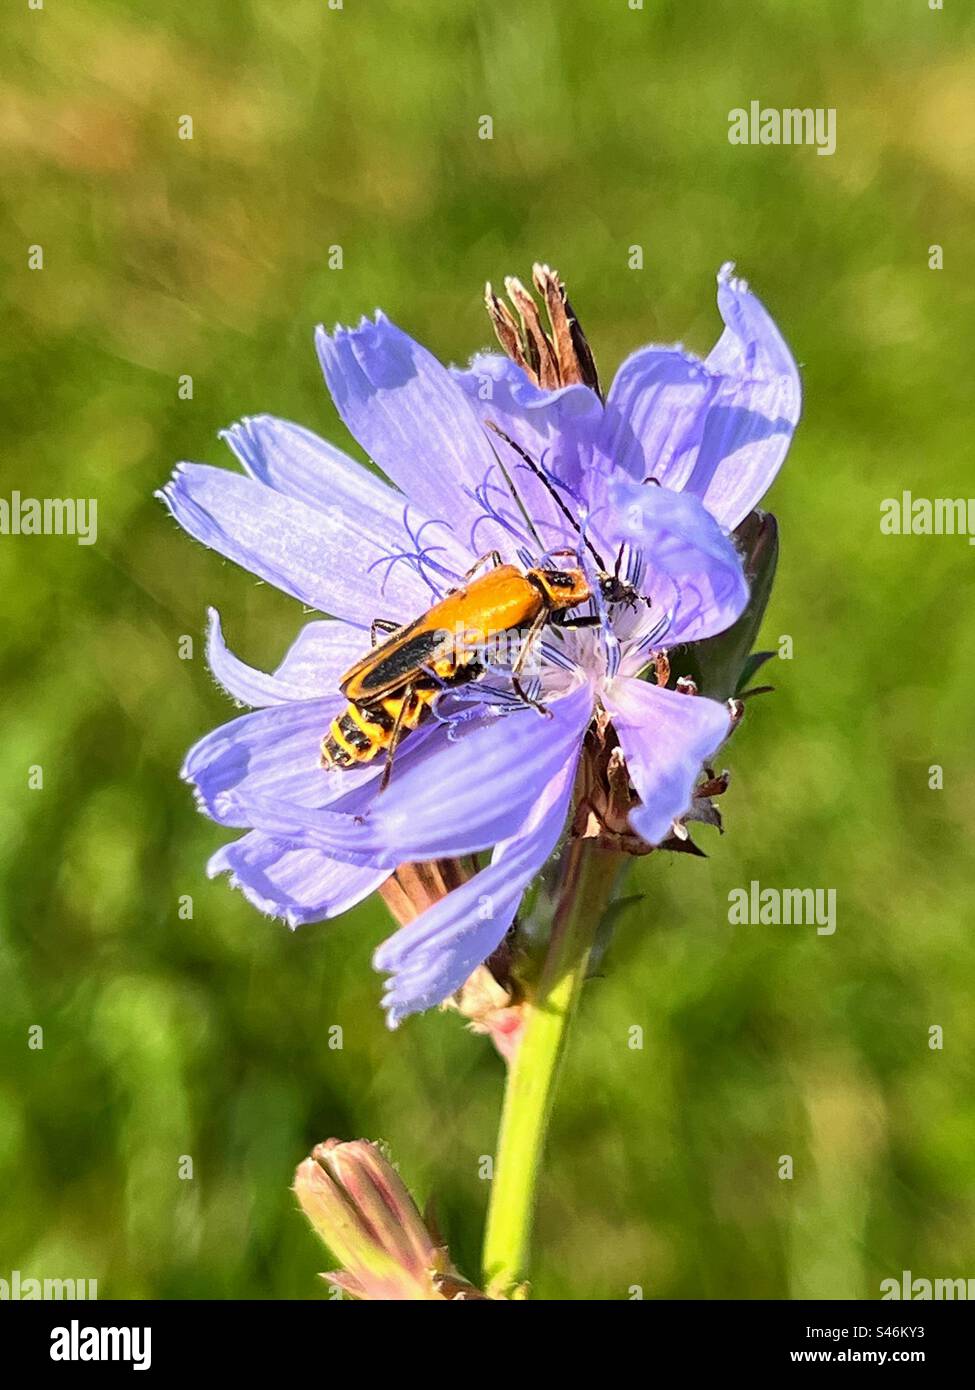 Goldenrod soldier beetle gathering nectar on a flower Stock Photo